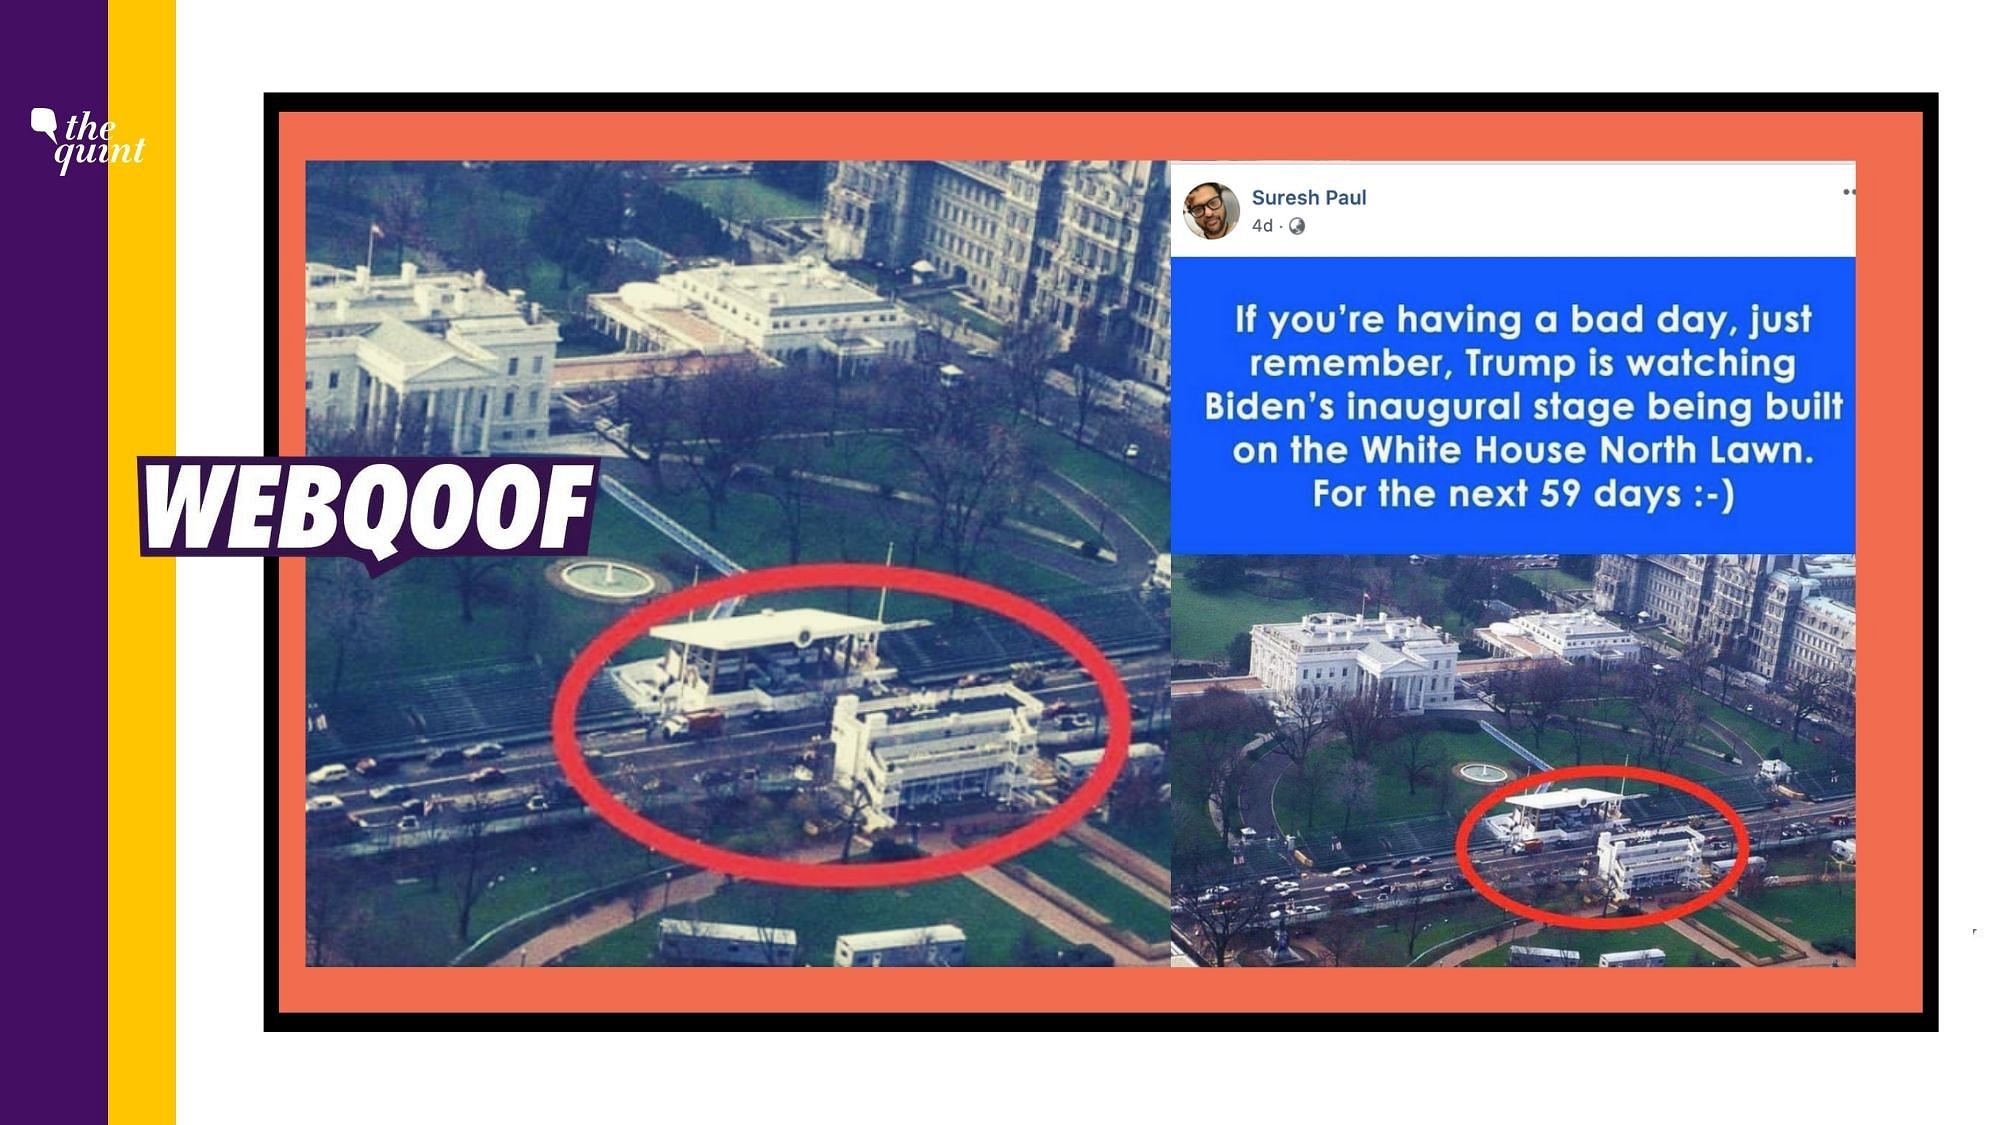 An old image from the inaugural ceremony of Bill Clinton was shared to falsely claim that it shows the construction of ‘Joe Biden’s inaugural stage’.